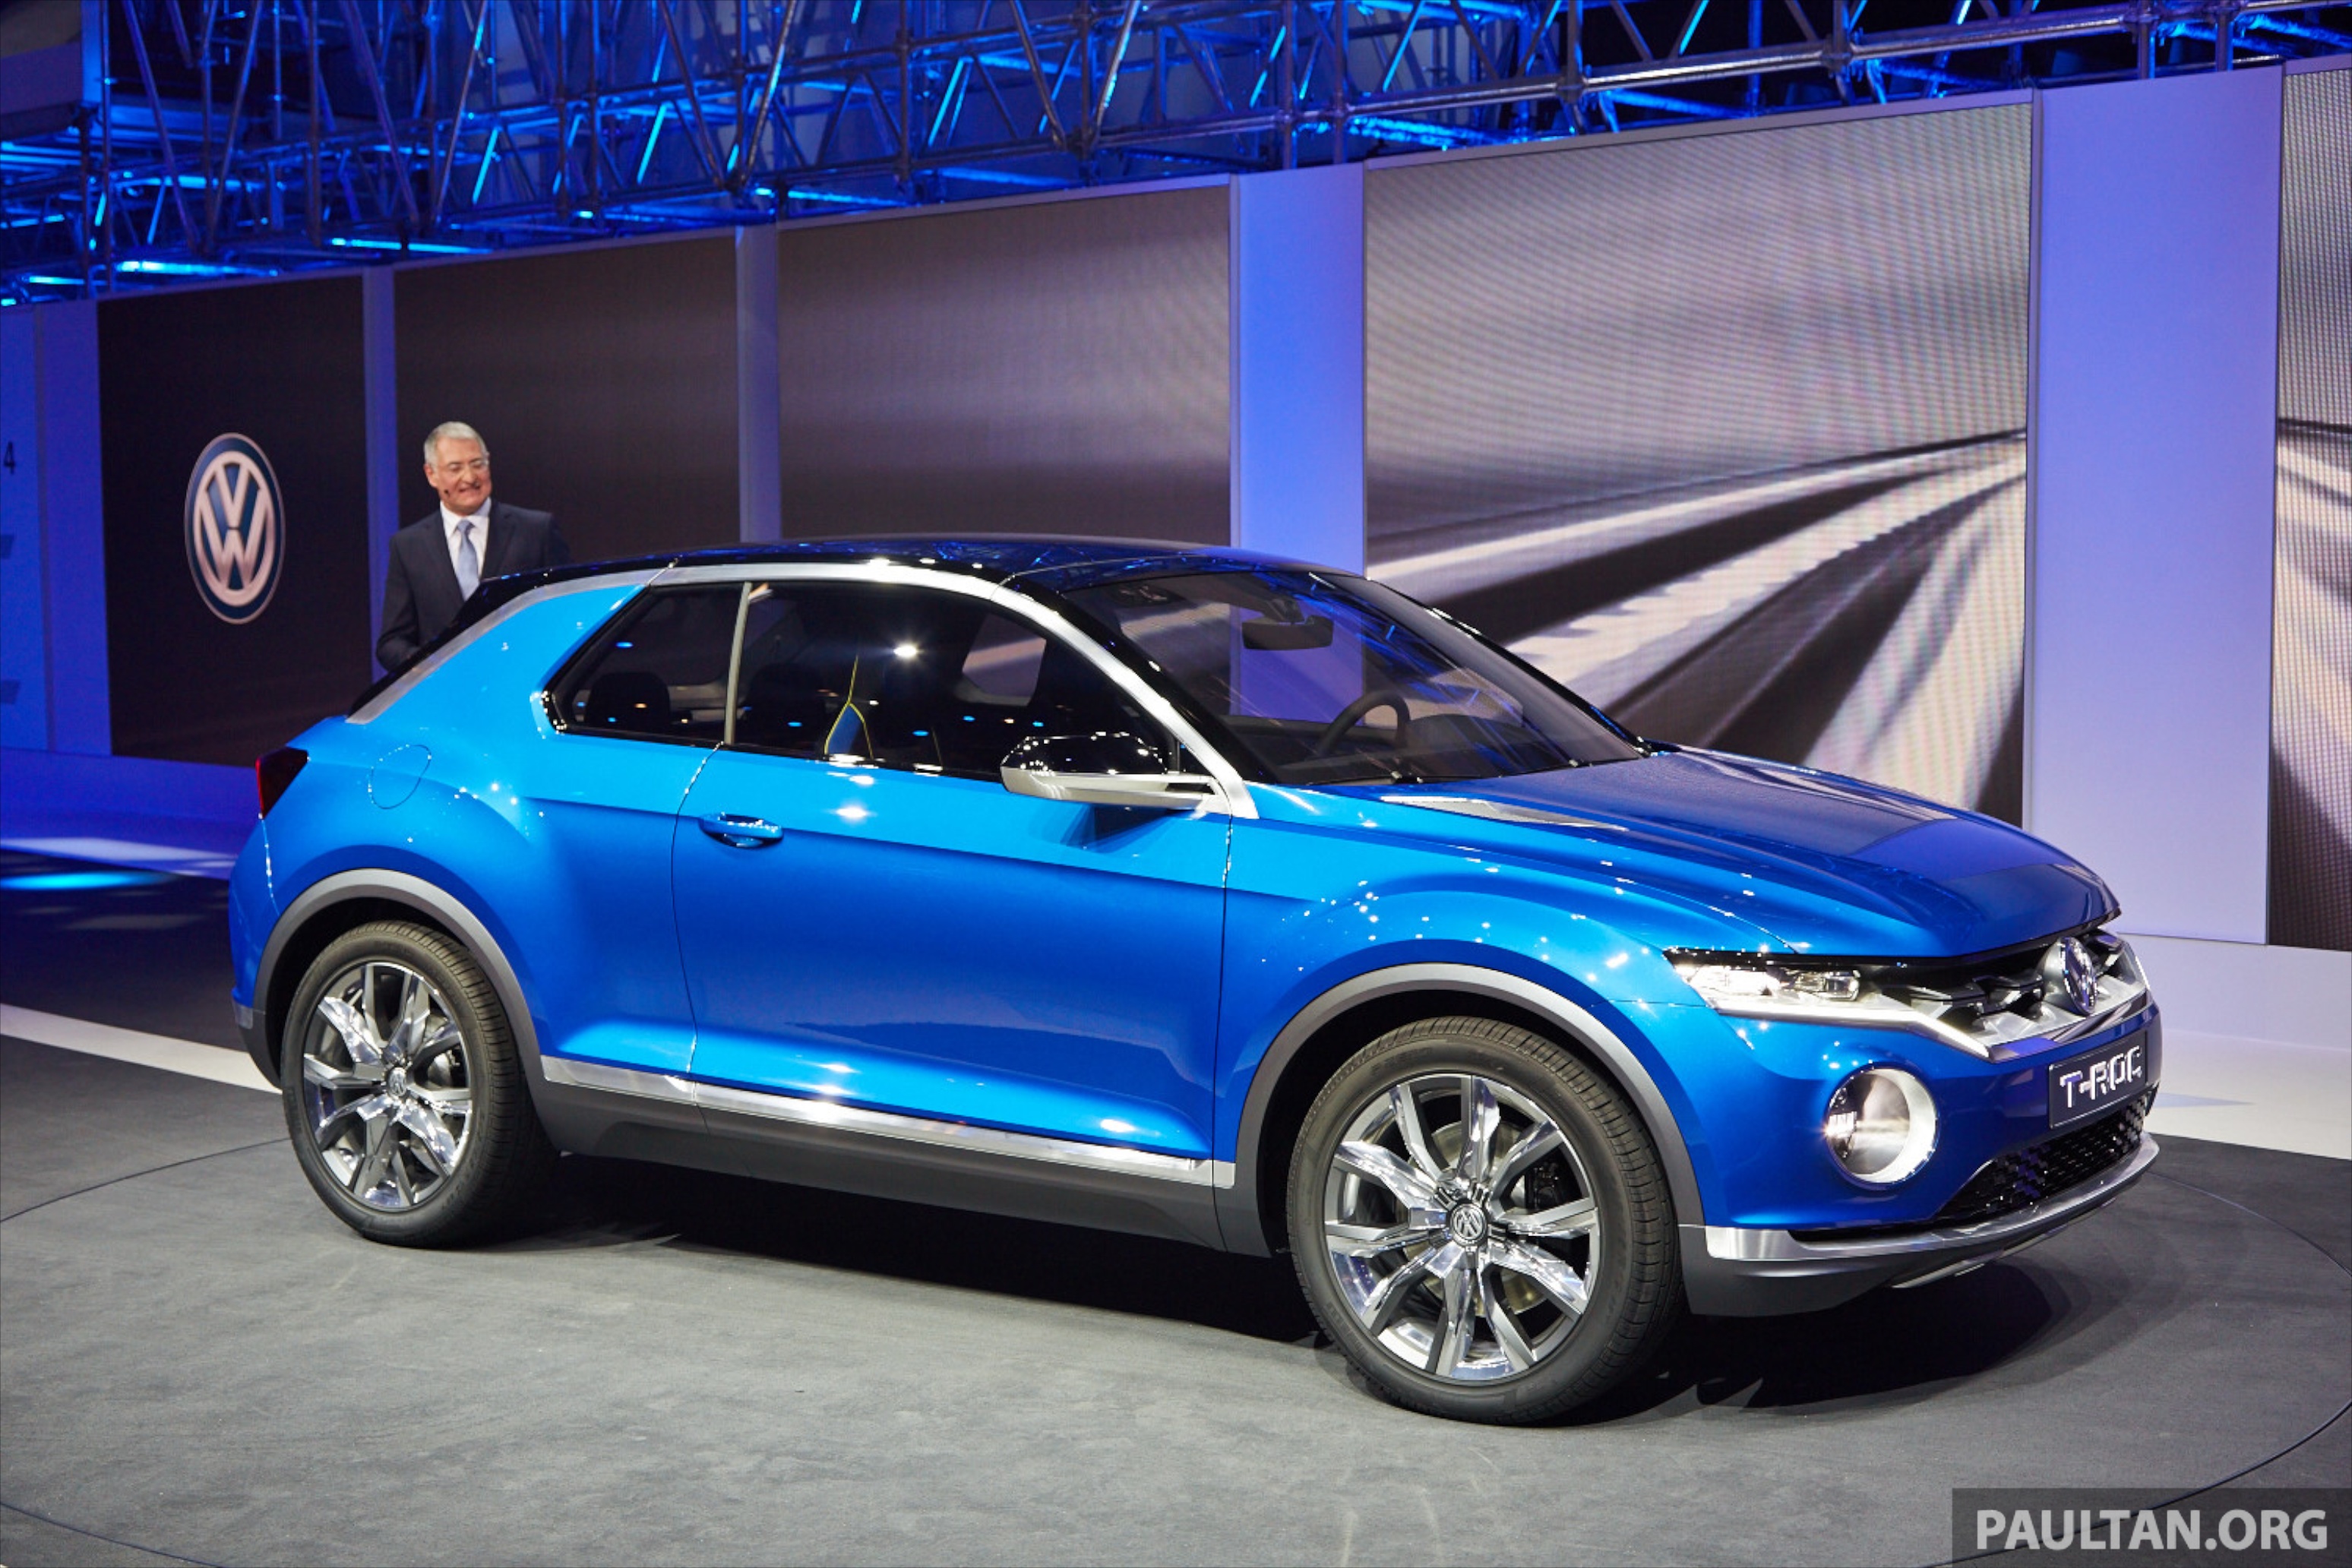 Volkswagen T-ROC Concept previews upcoming SUV Paul Tan - Image 232481